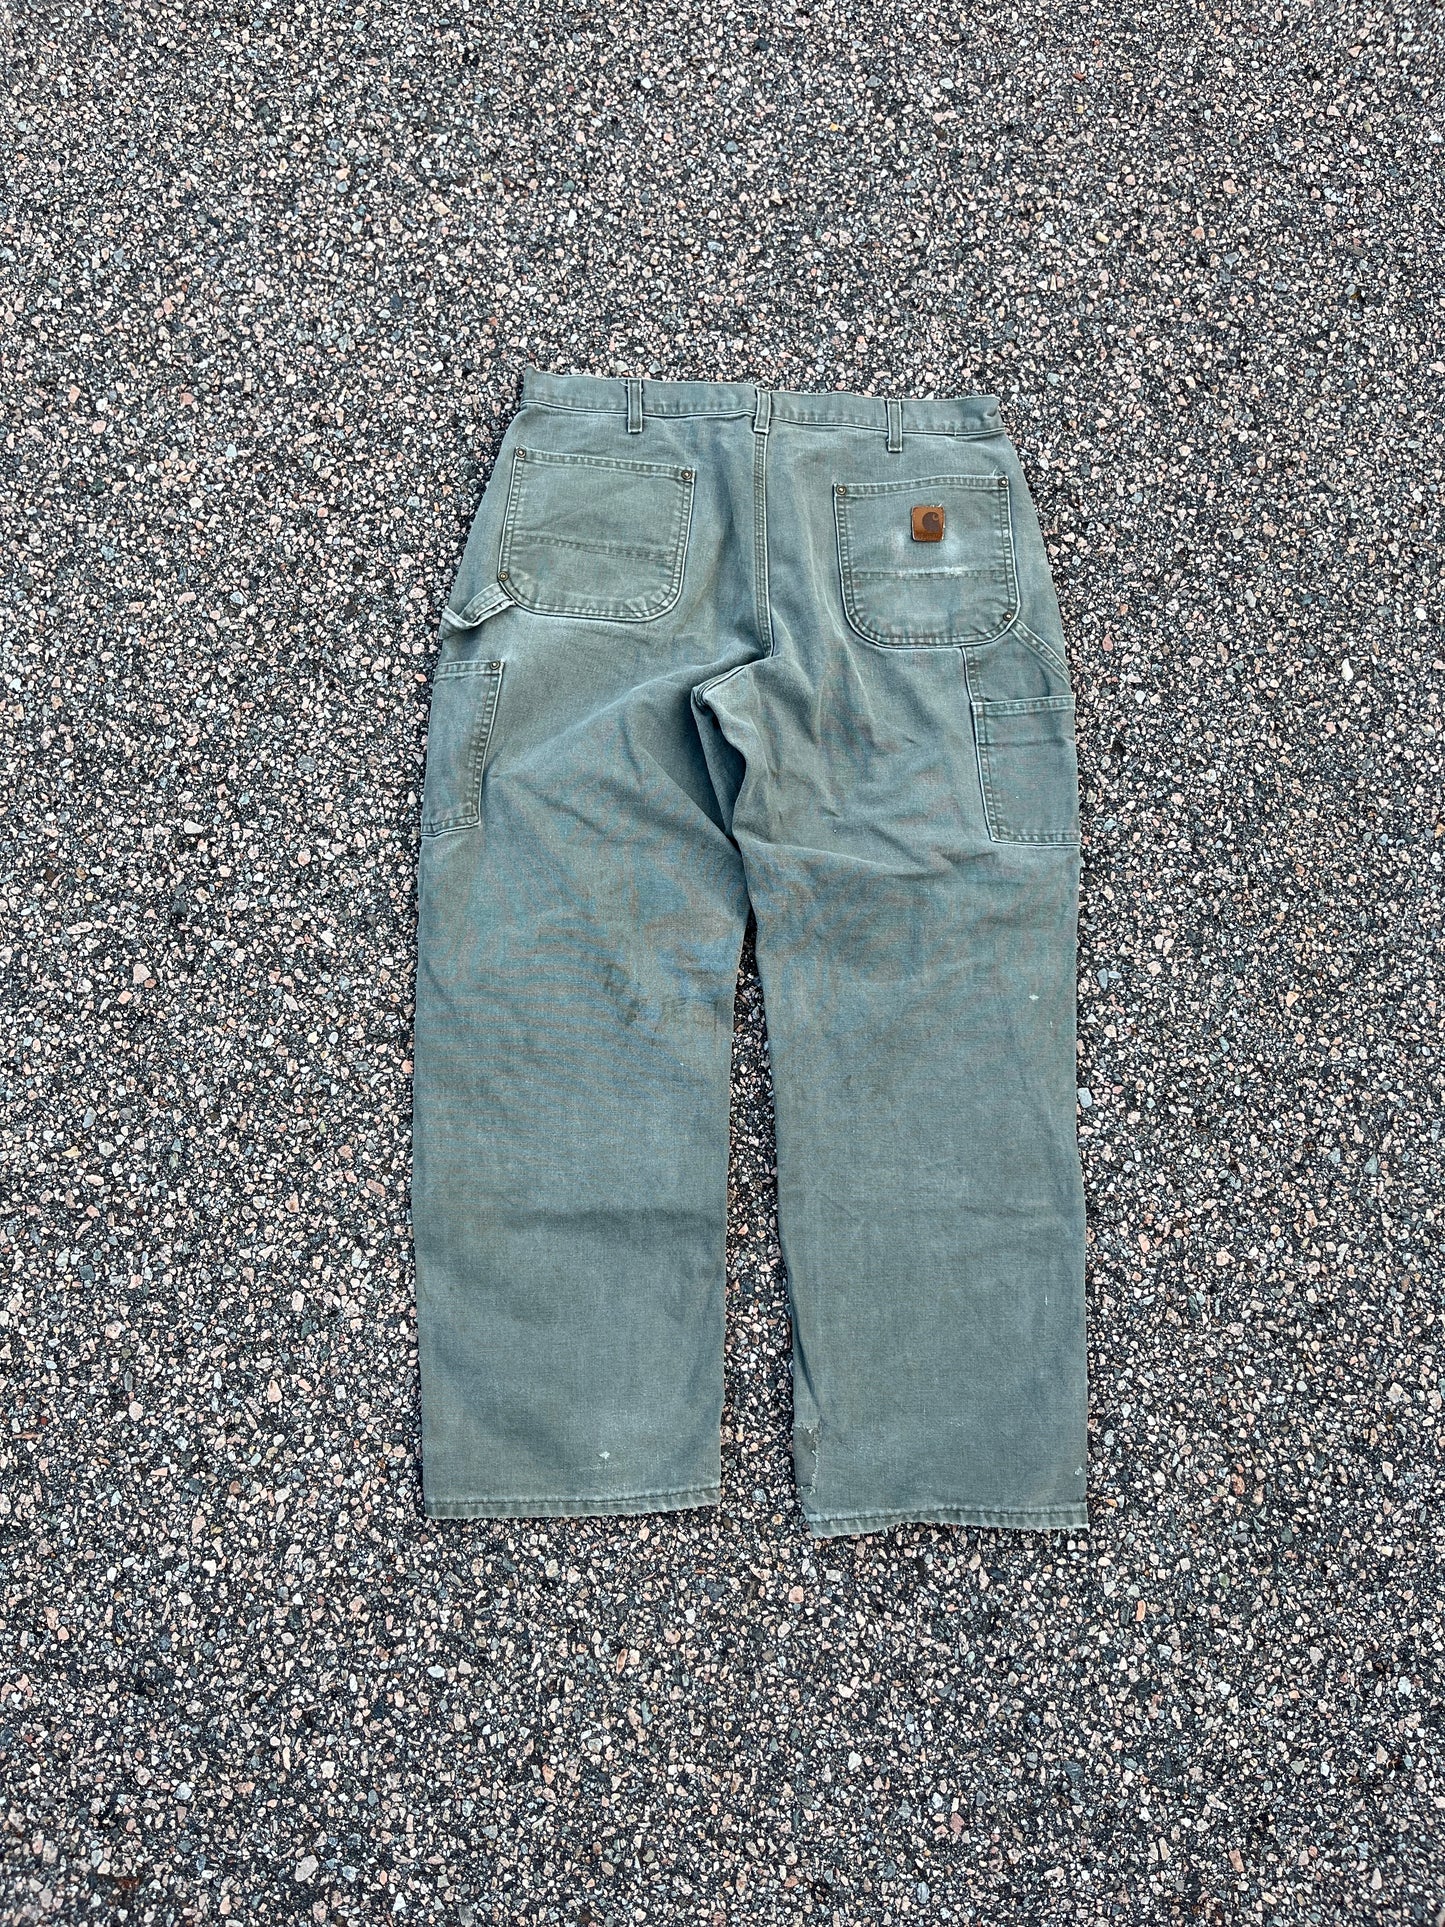 Faded Olive Green Carhartt Double Knee Pants - 36 x 29